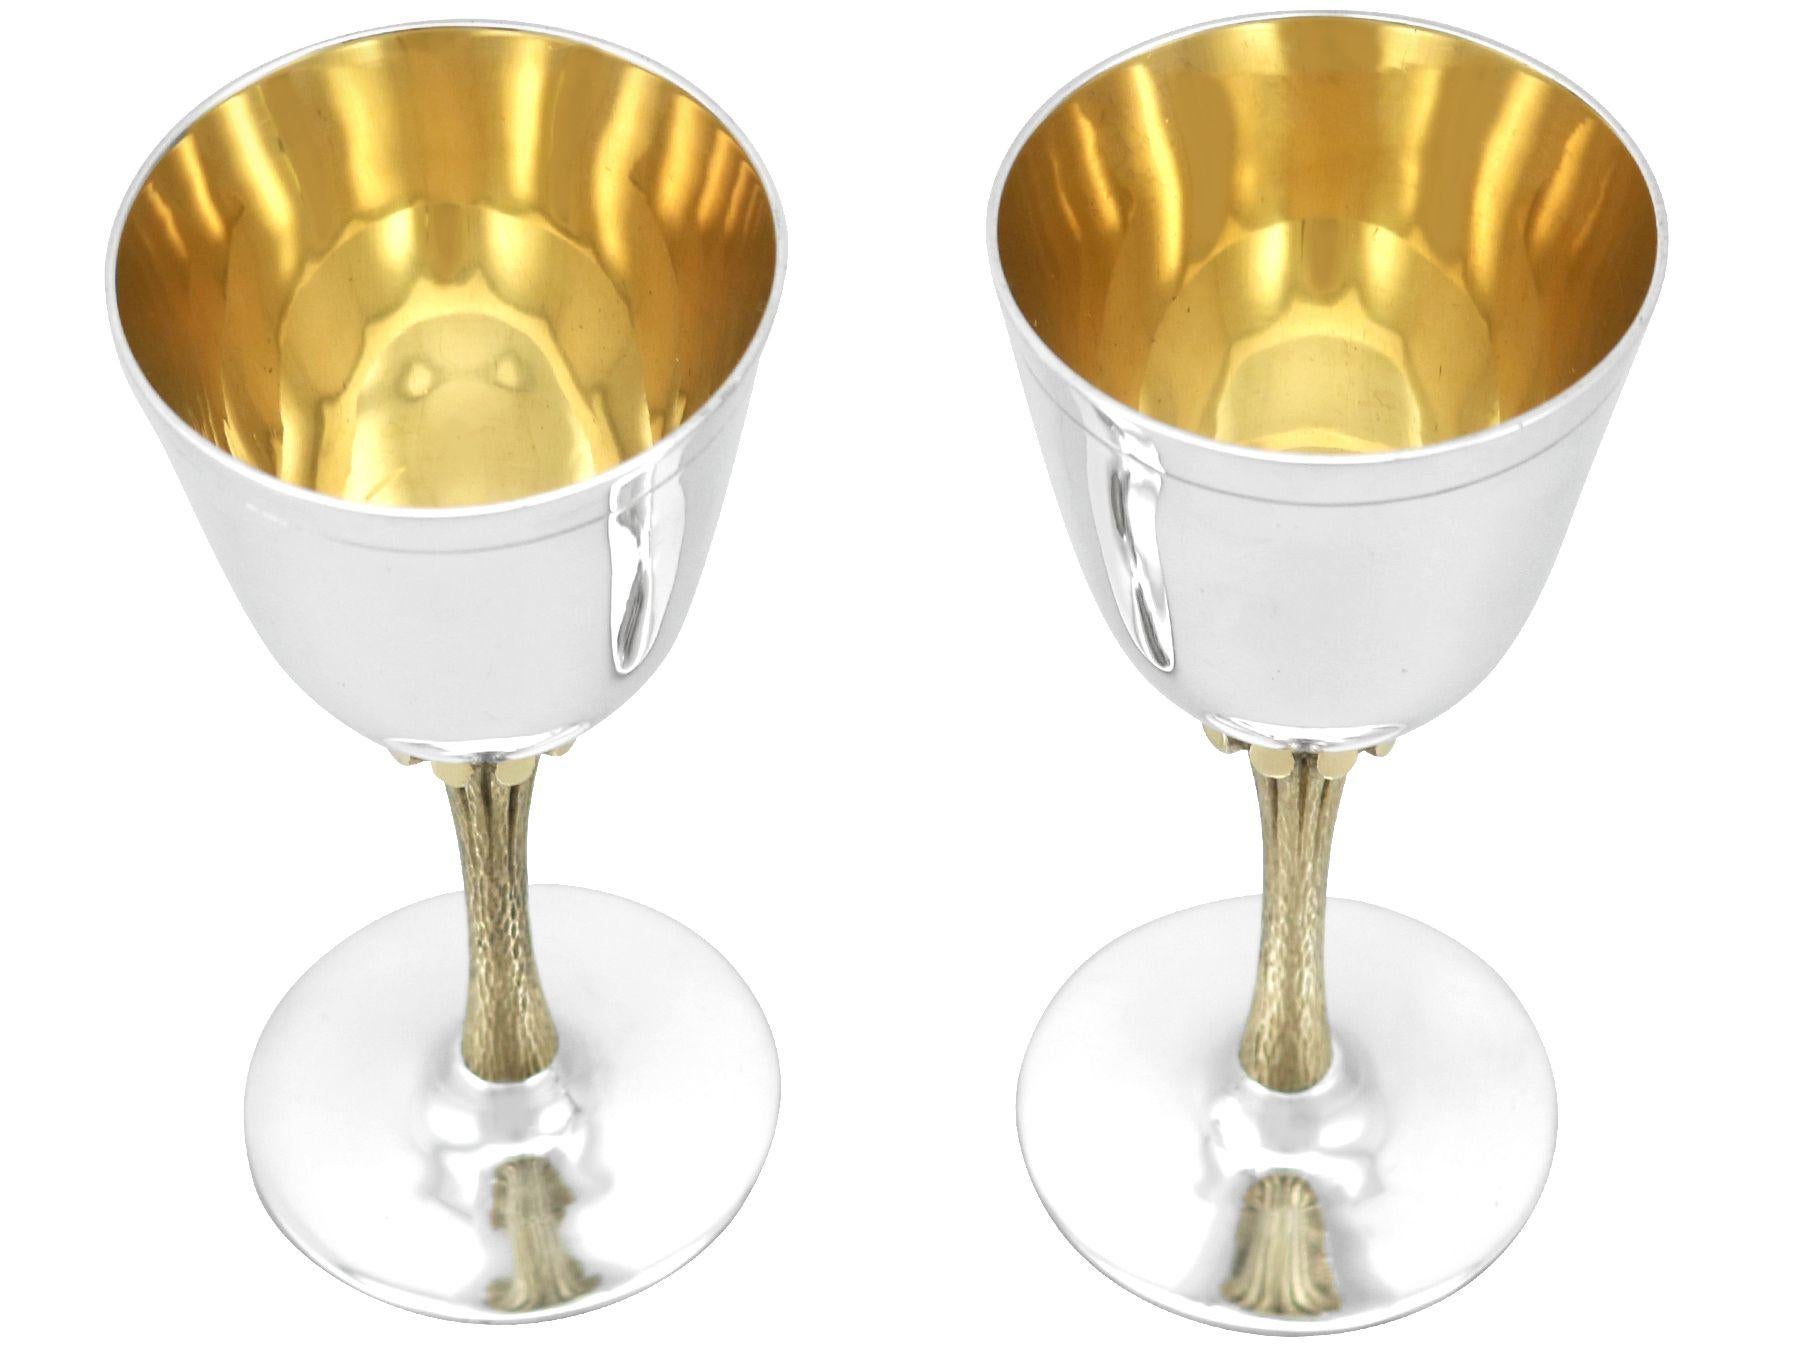 An exceptional, fine and impressive pair of vintage English sterling silver wine goblets; an addition to our collectable range of silverware.

These exceptional vintage sterling silver goblets have a plain bell shaped form to a naturalistic